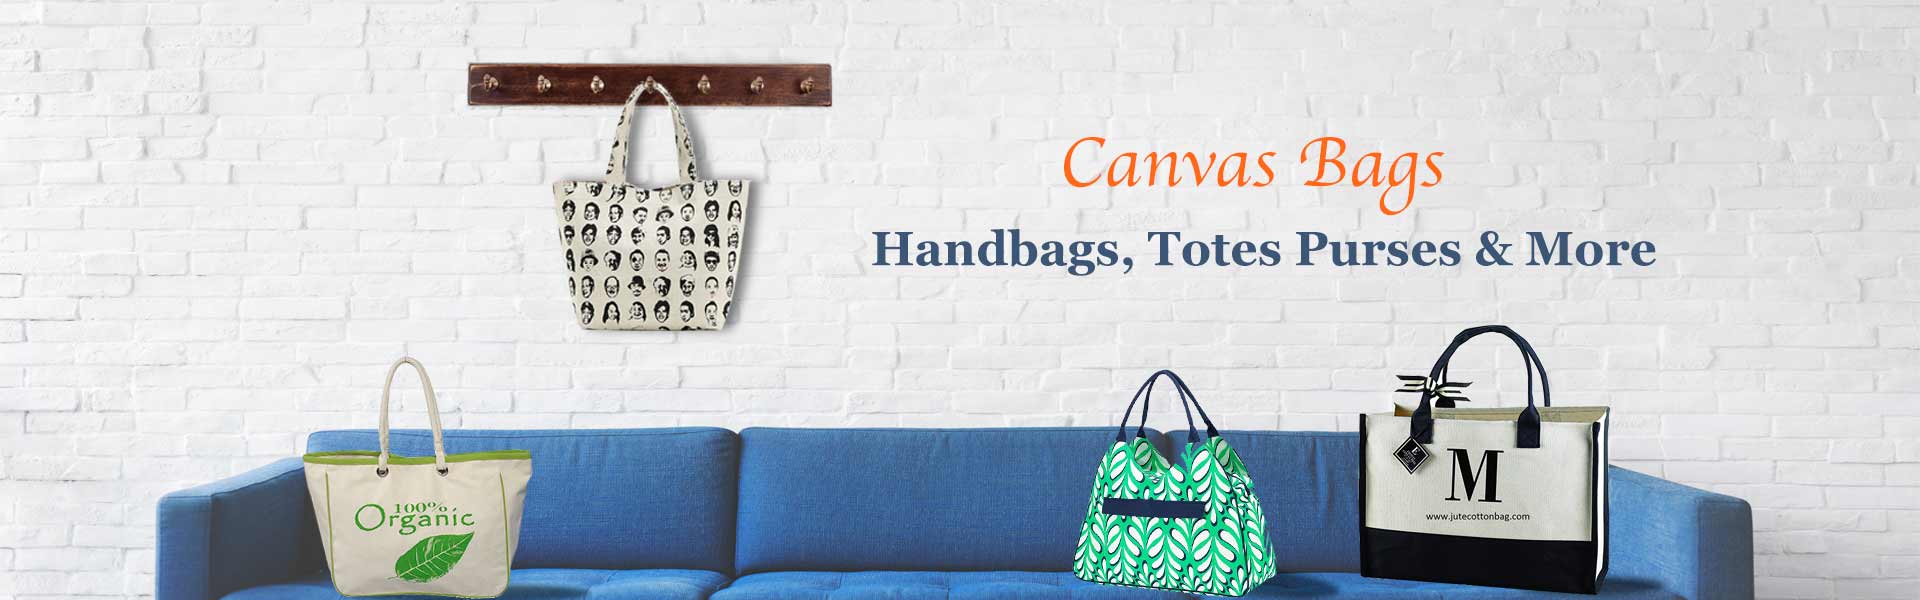 Wholesale Canvas Bags Supplier in Bologna